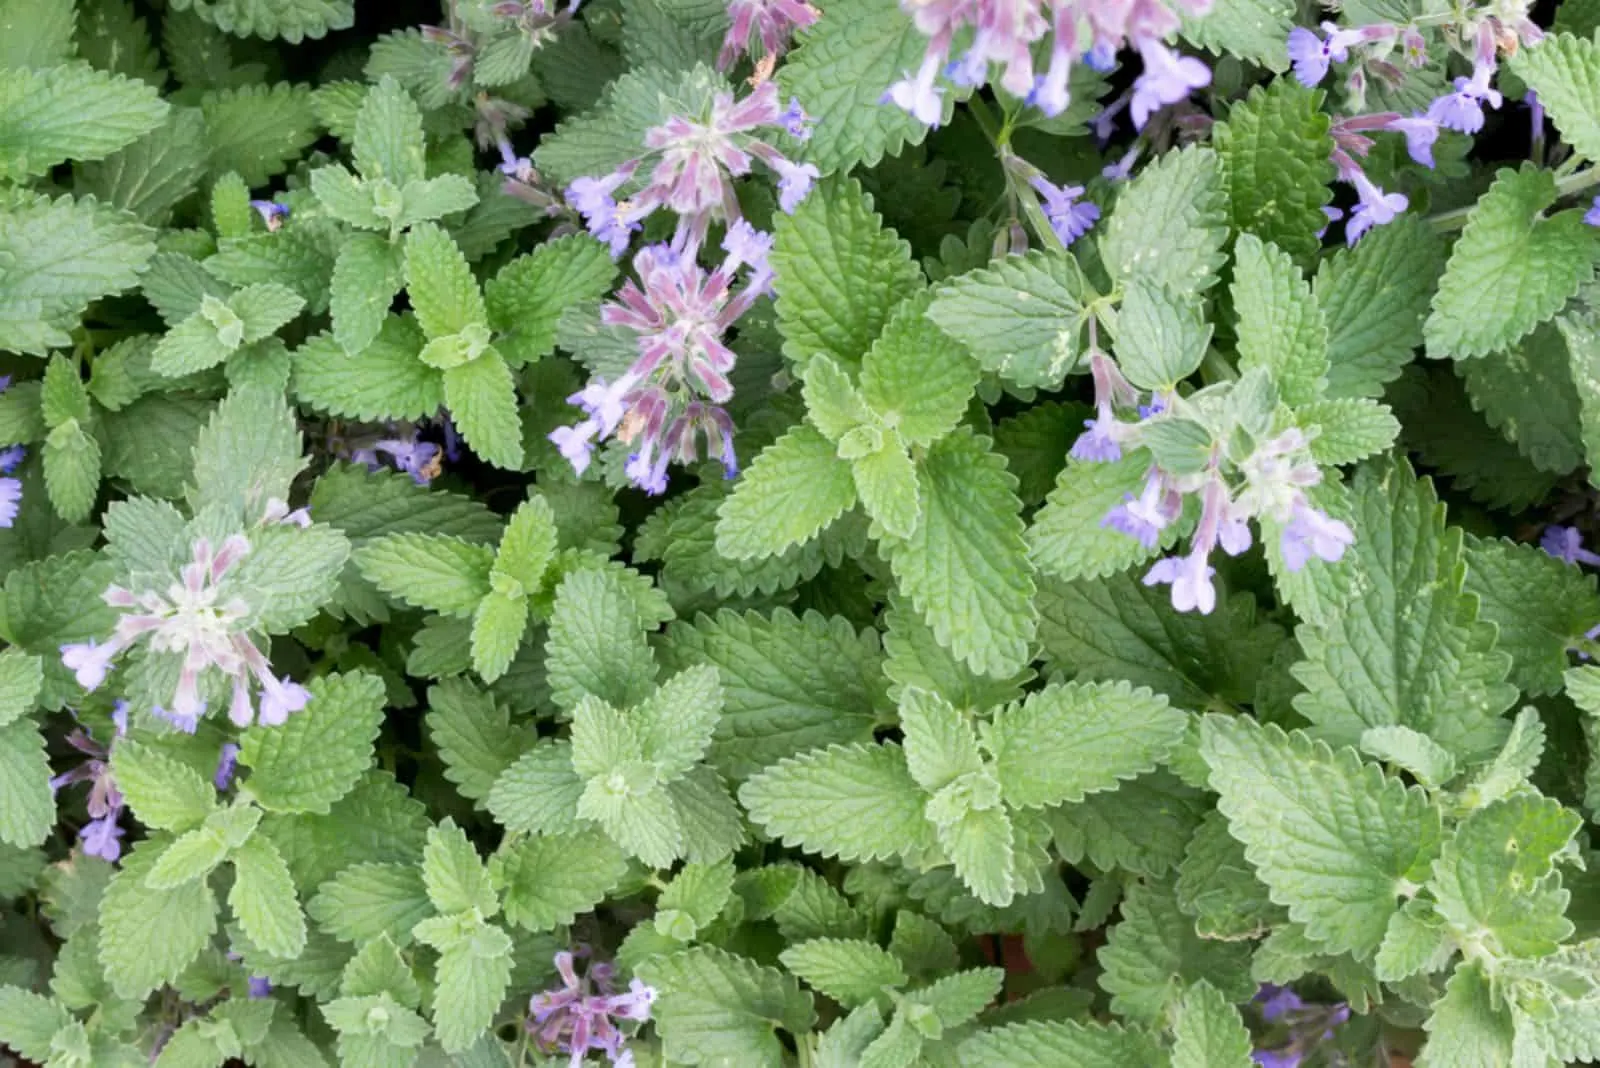 Catnip or catmint green herb